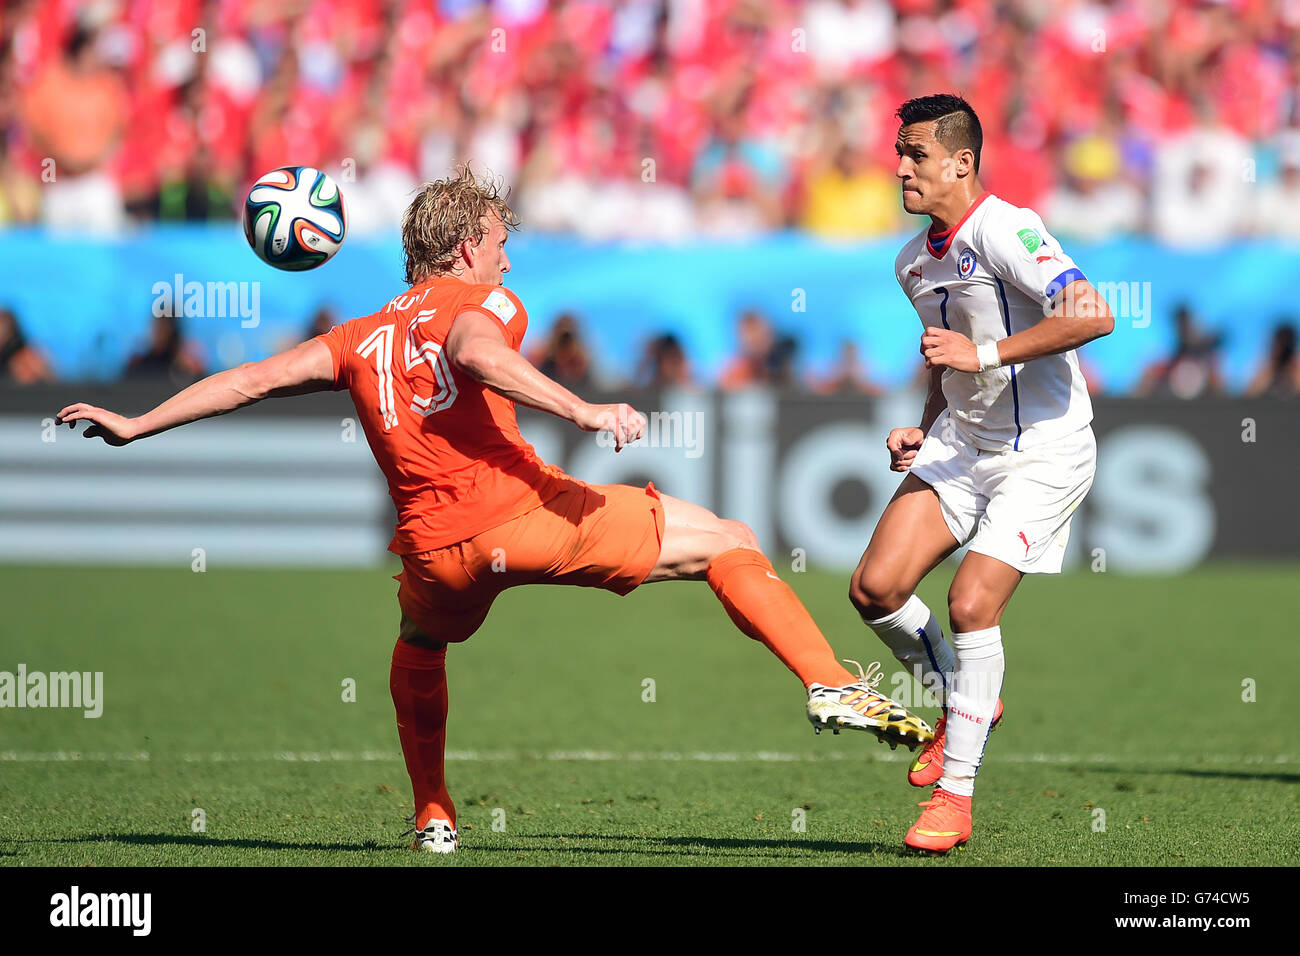 Netherlands' Dirk Kuyt battles for the ball with Chile's Alexis Sanchez Stock Photo